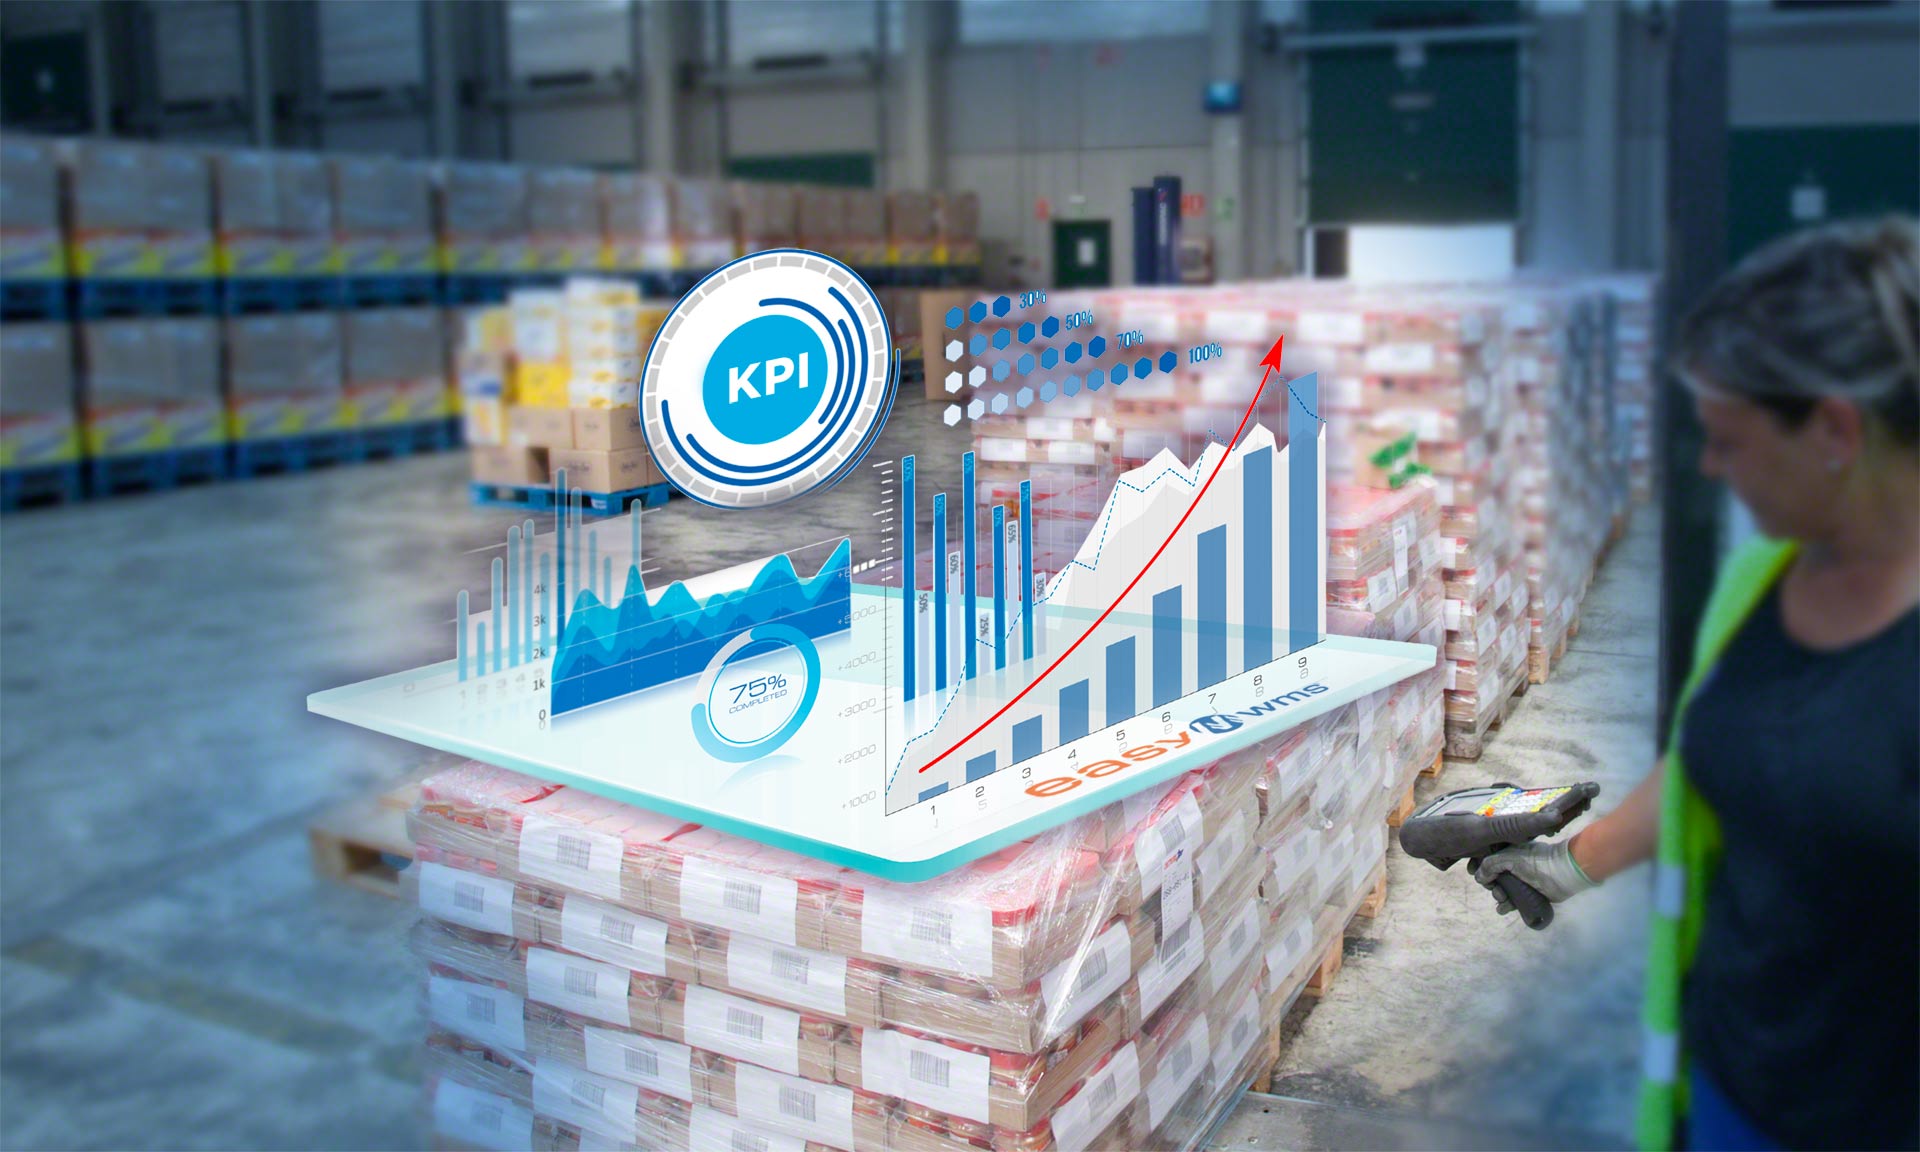 Inventory KPIs make it possible to know exactly what stock is stored in the warehouse